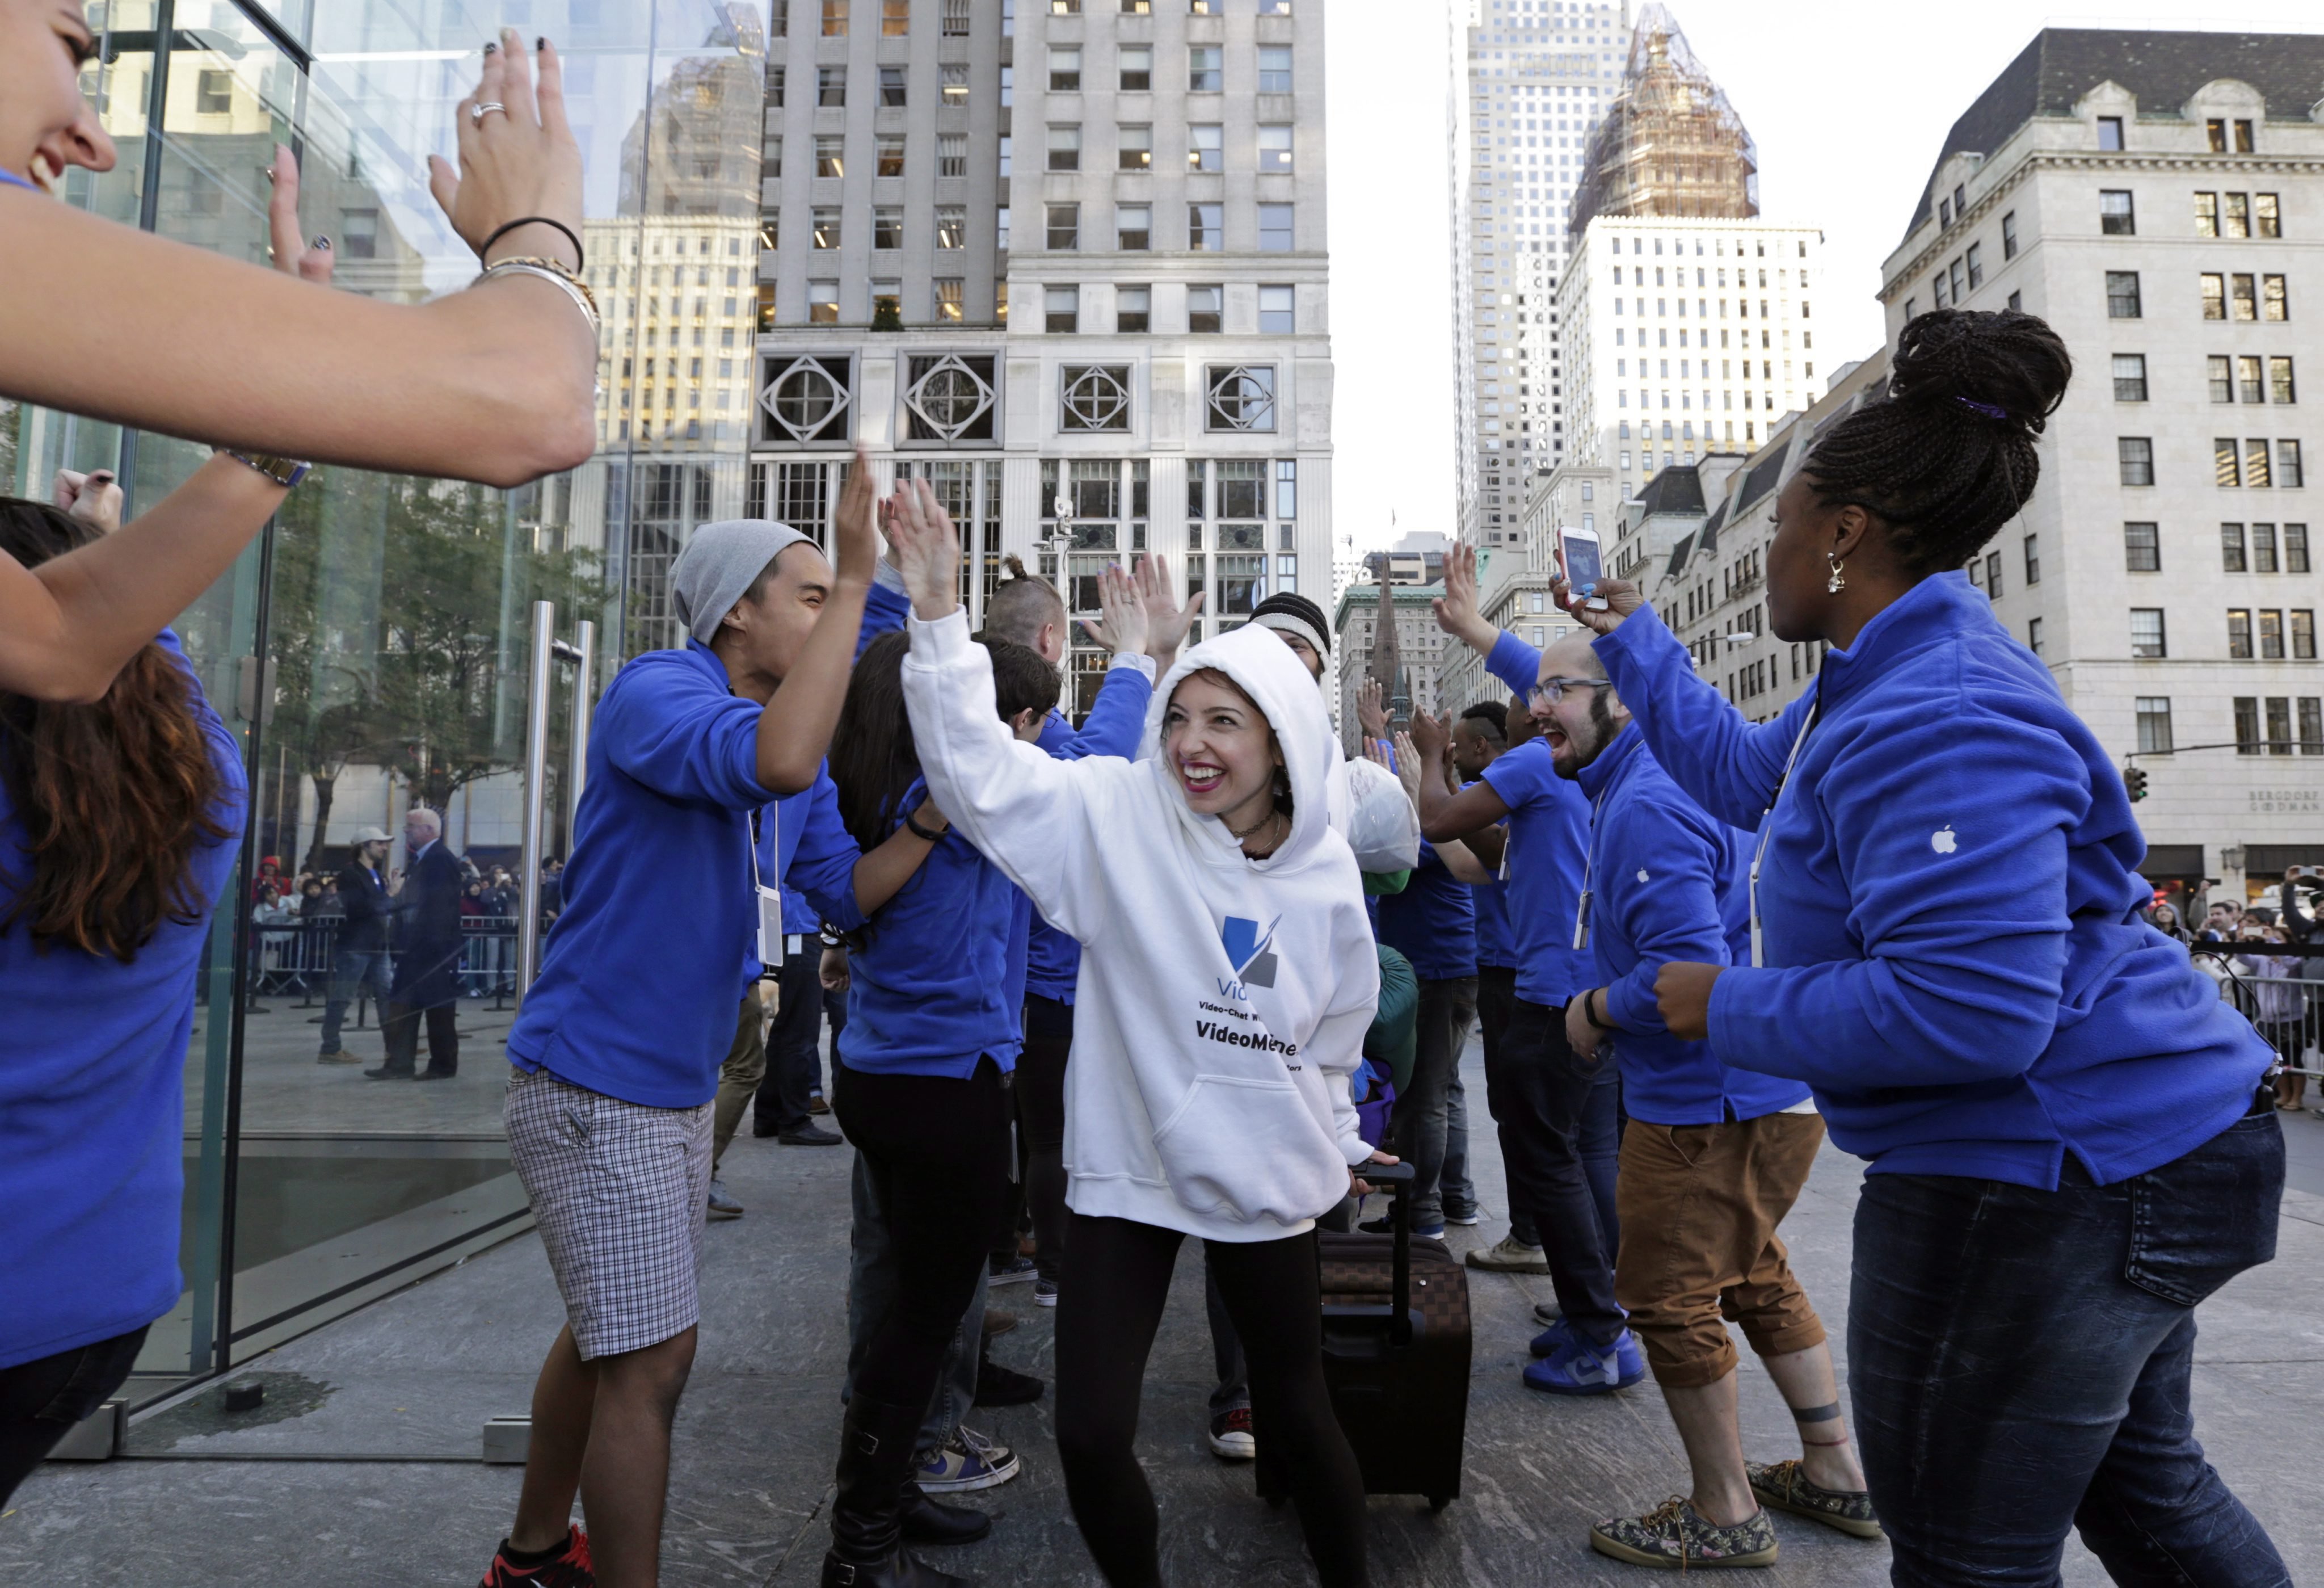 After being first in line for 19 days, Moon Ray, from Jackson, Miss. runs the gauntlet of Apple store workers as she enters the Fifth Avenue Apple store in New York on Sept. 19, 2014.